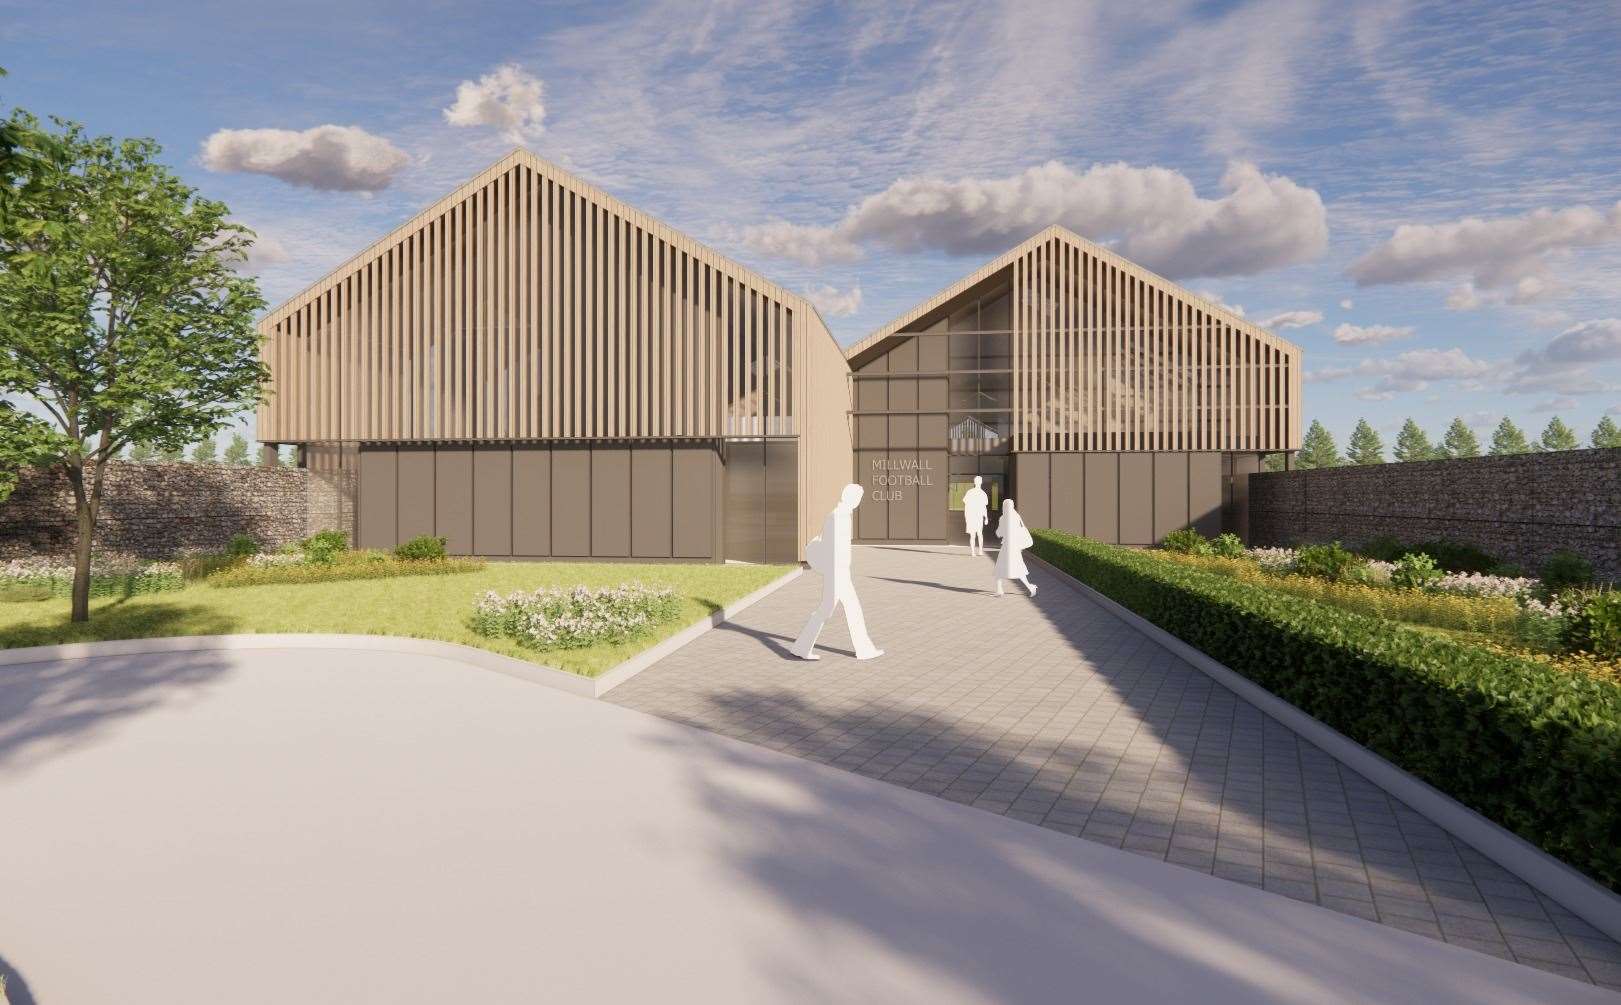 The entrance for the first team at the proposed training facility in West Kingsdown. Photo: AFL